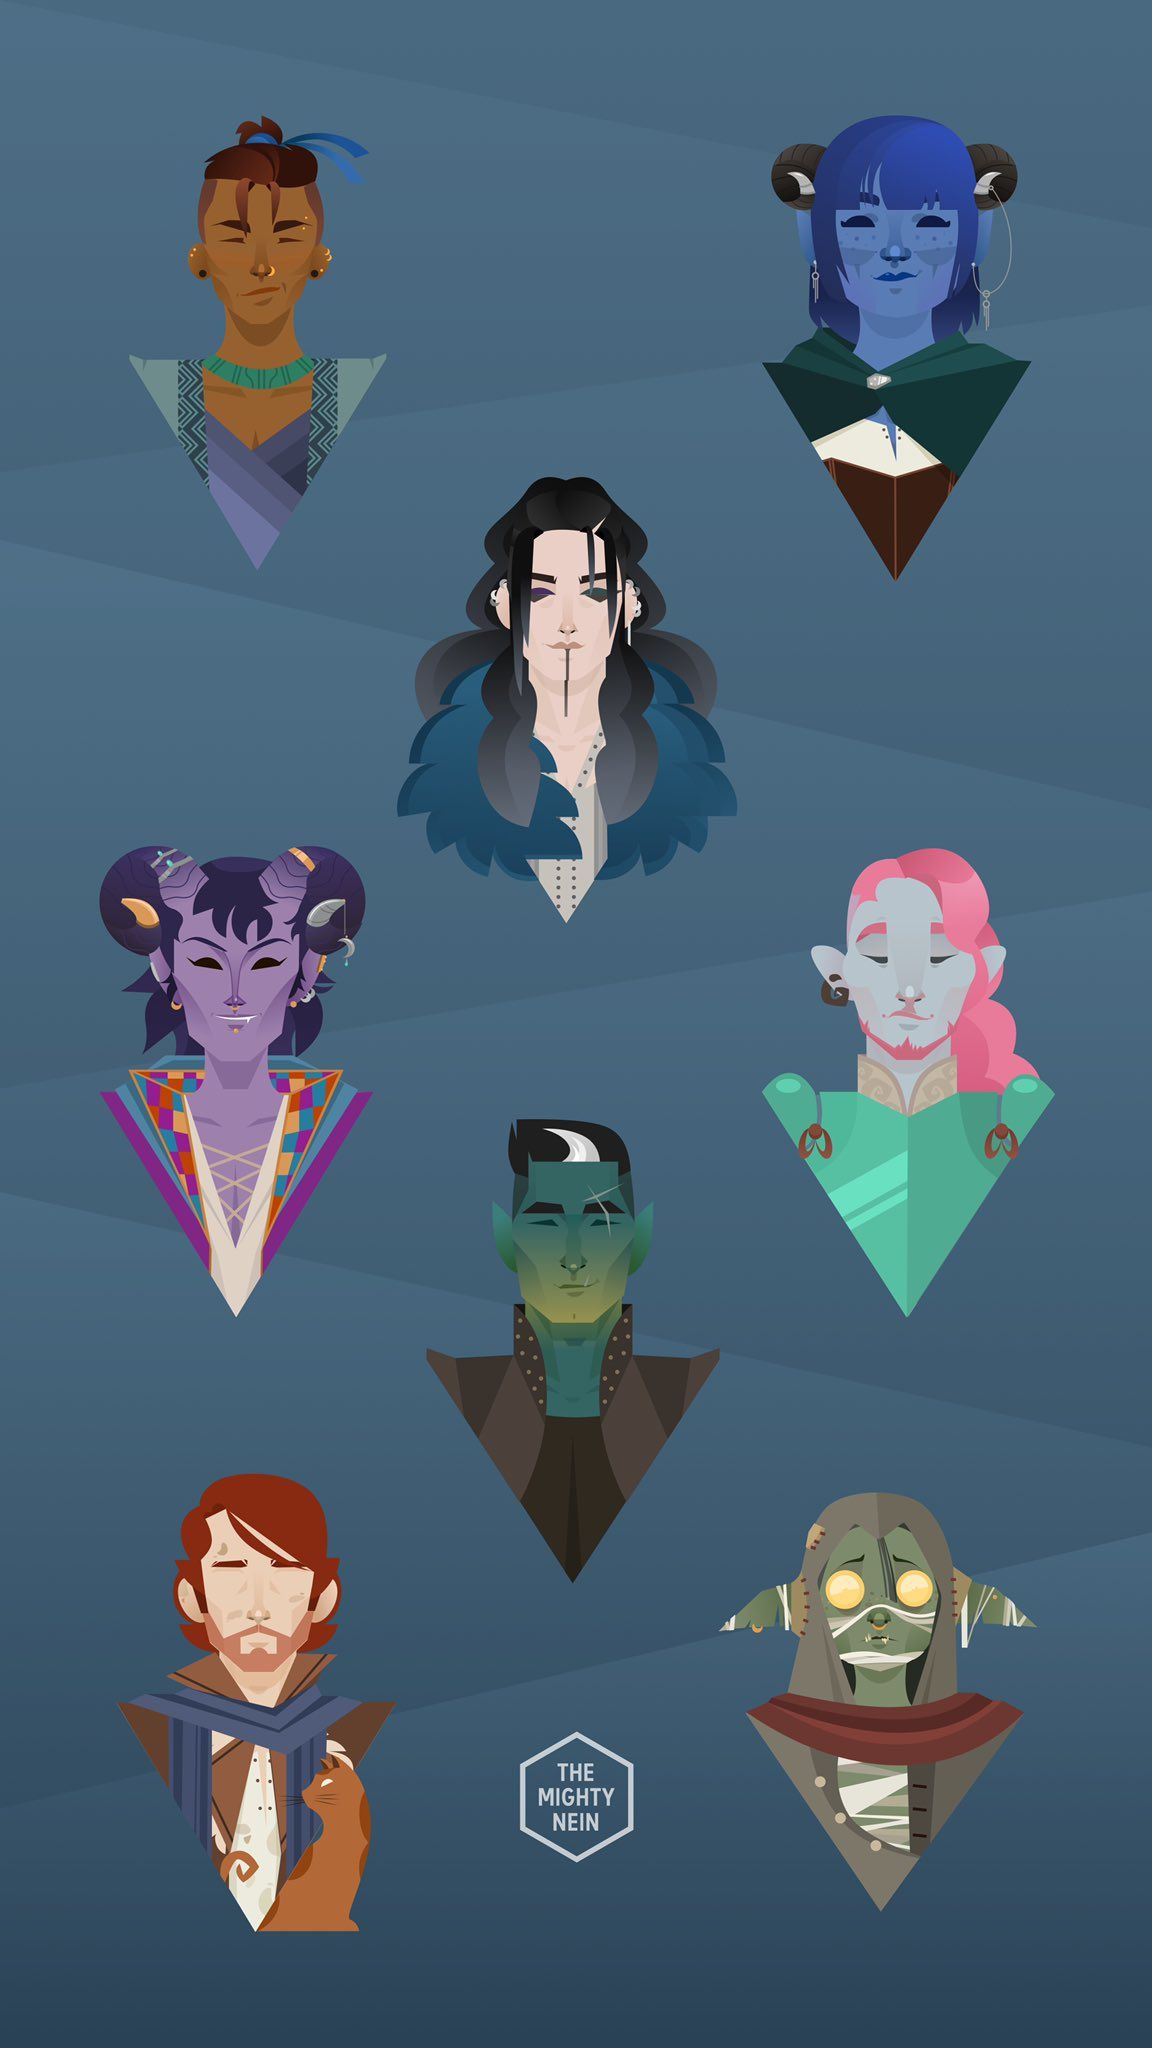 Flipboard: An IPhone Wallpaper of my entire #CriticalRole